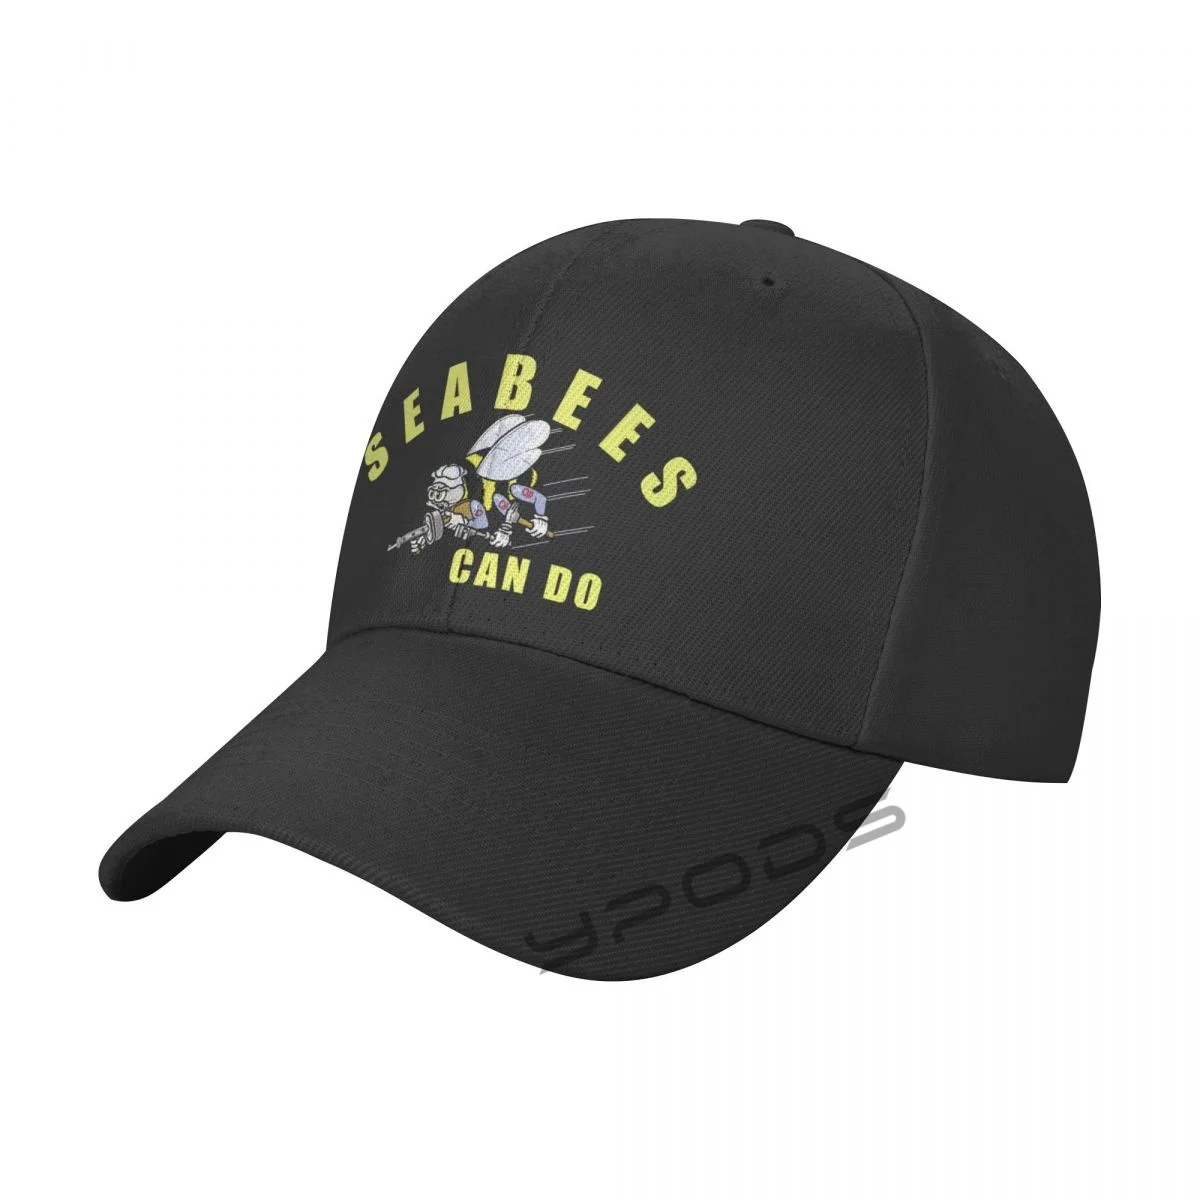 

Seabees Can Do New Baseball Caps for Men Cap Women Hat Snapback Casual Cap Casquette hats